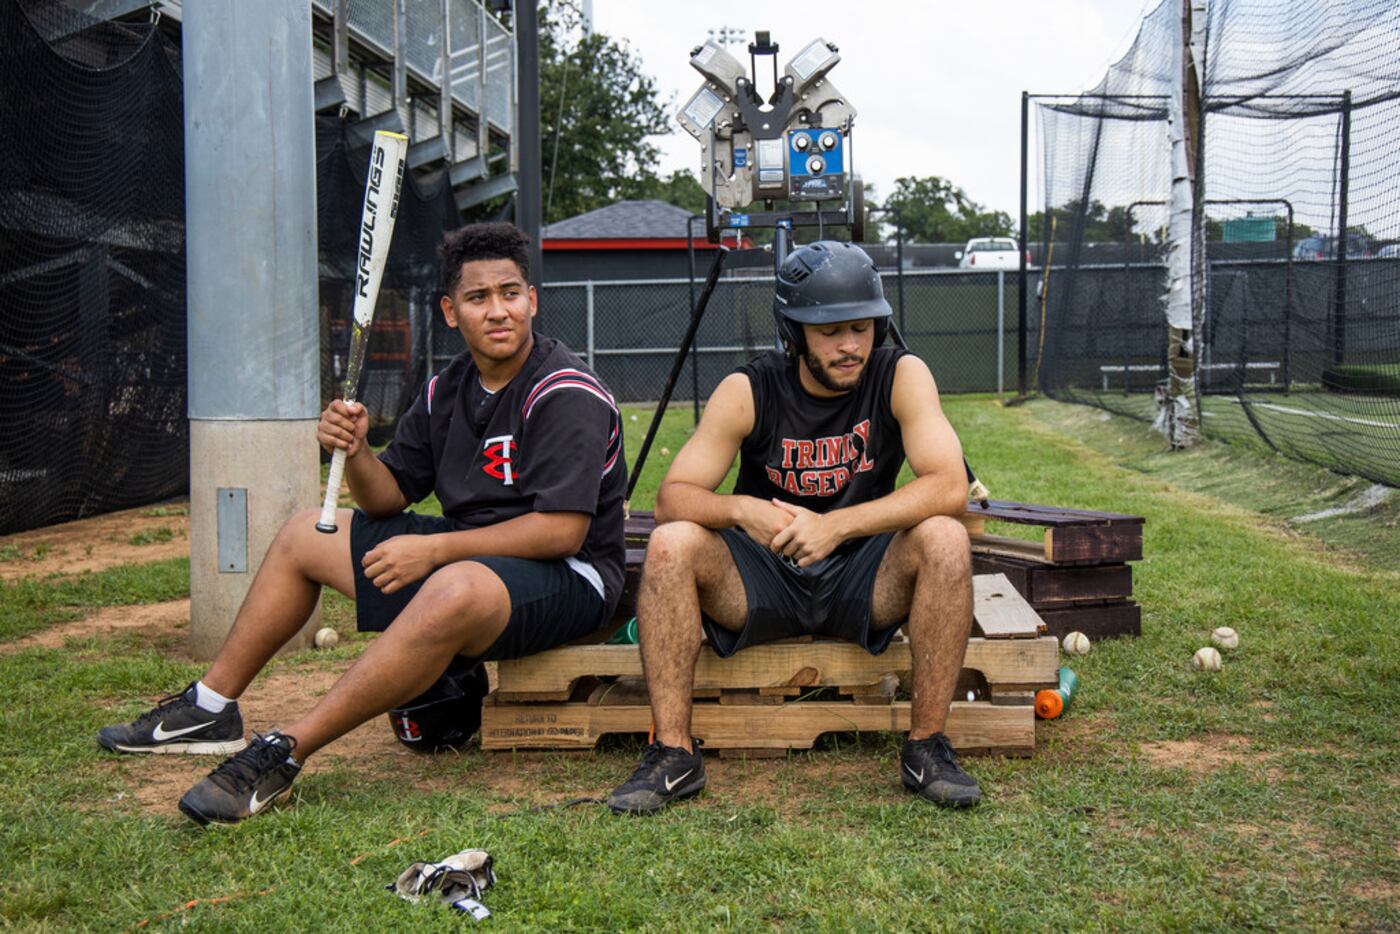 Laki Ellis and Nike Tratree wait their turns in the batting cage during baseball practice at...